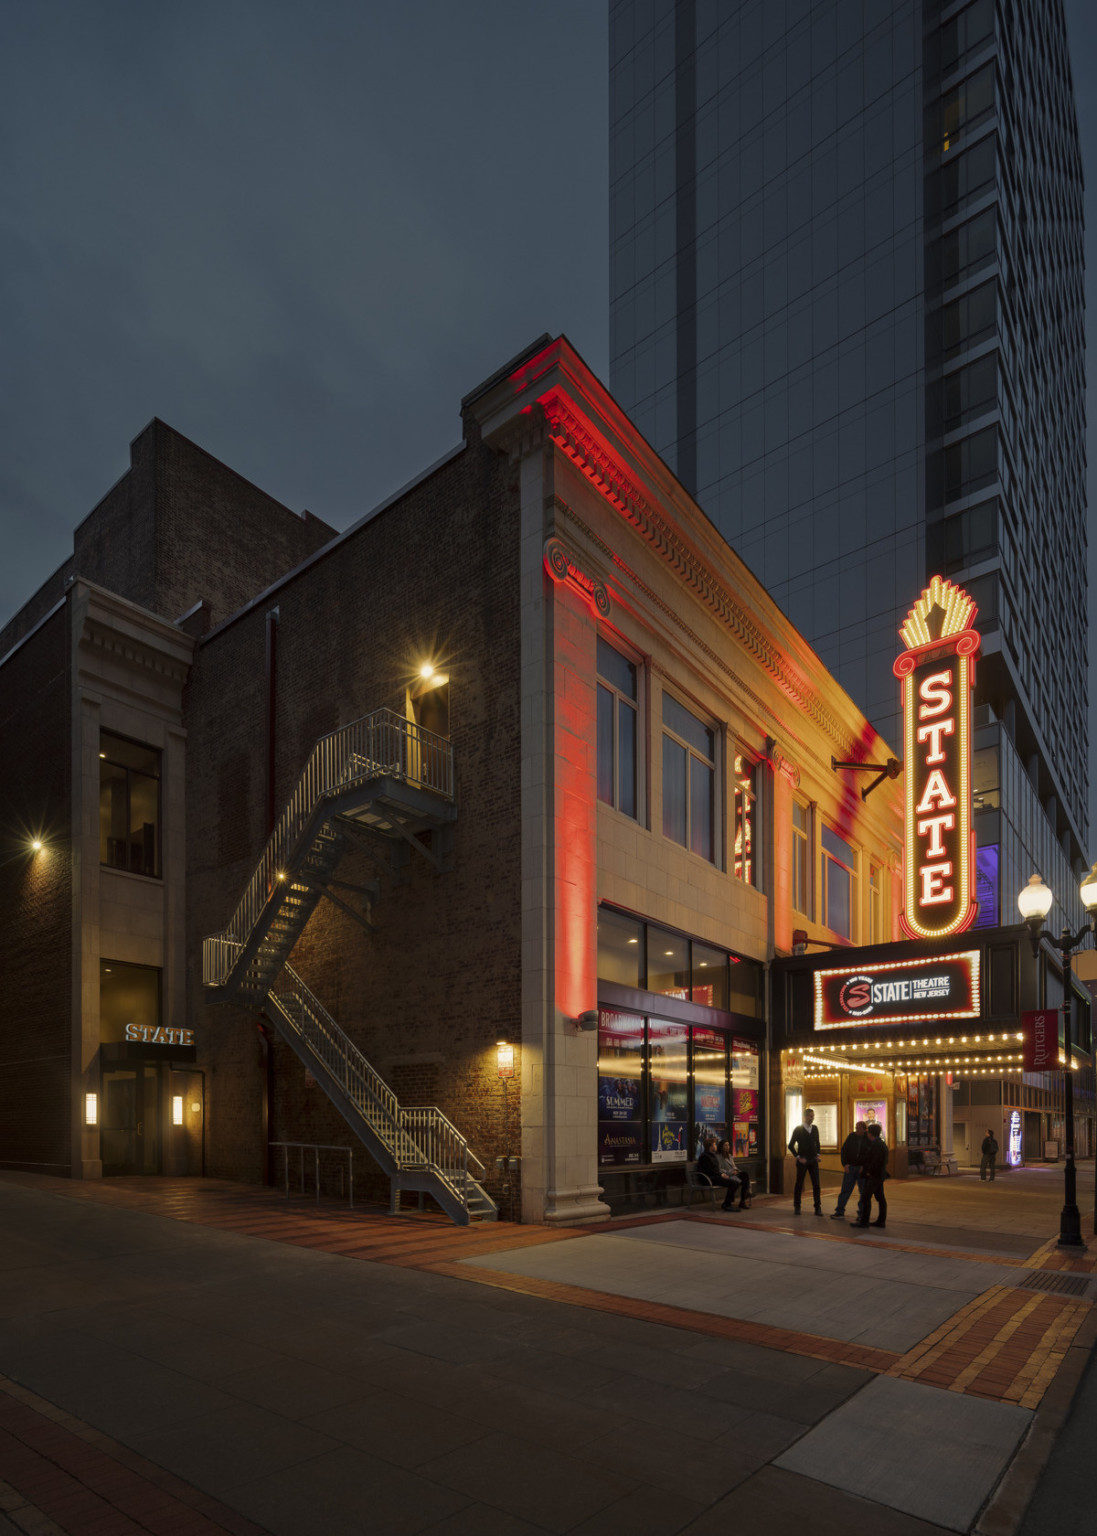 Theater exterior from corner with illuminated retro neon blade sign reading State over marquee. Stairs on side of building